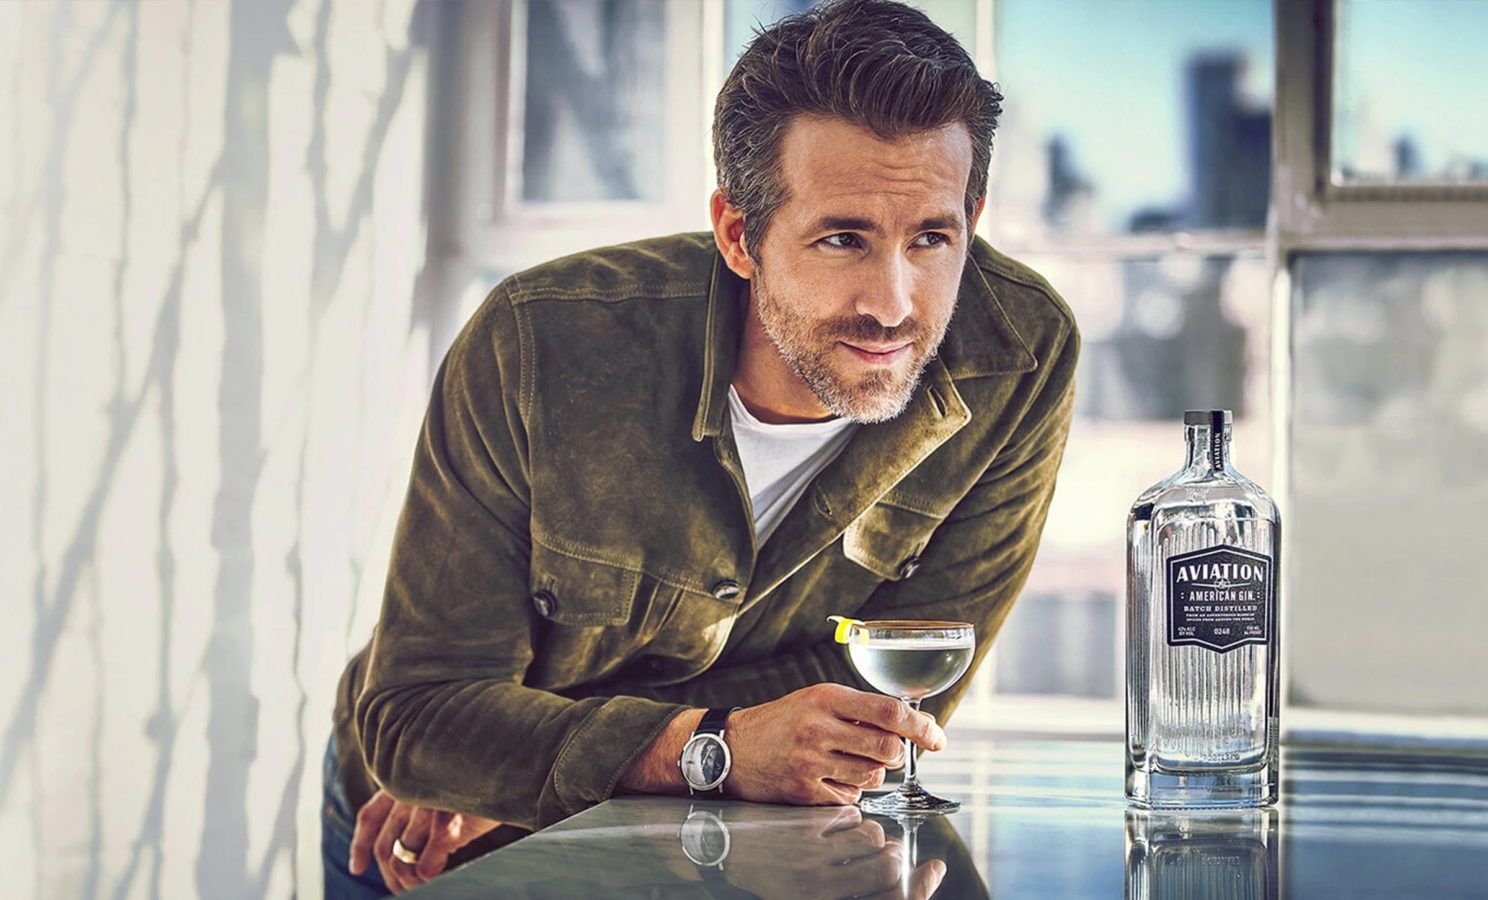 These are the best and worst celebrity alcohol brands, according to a recent study